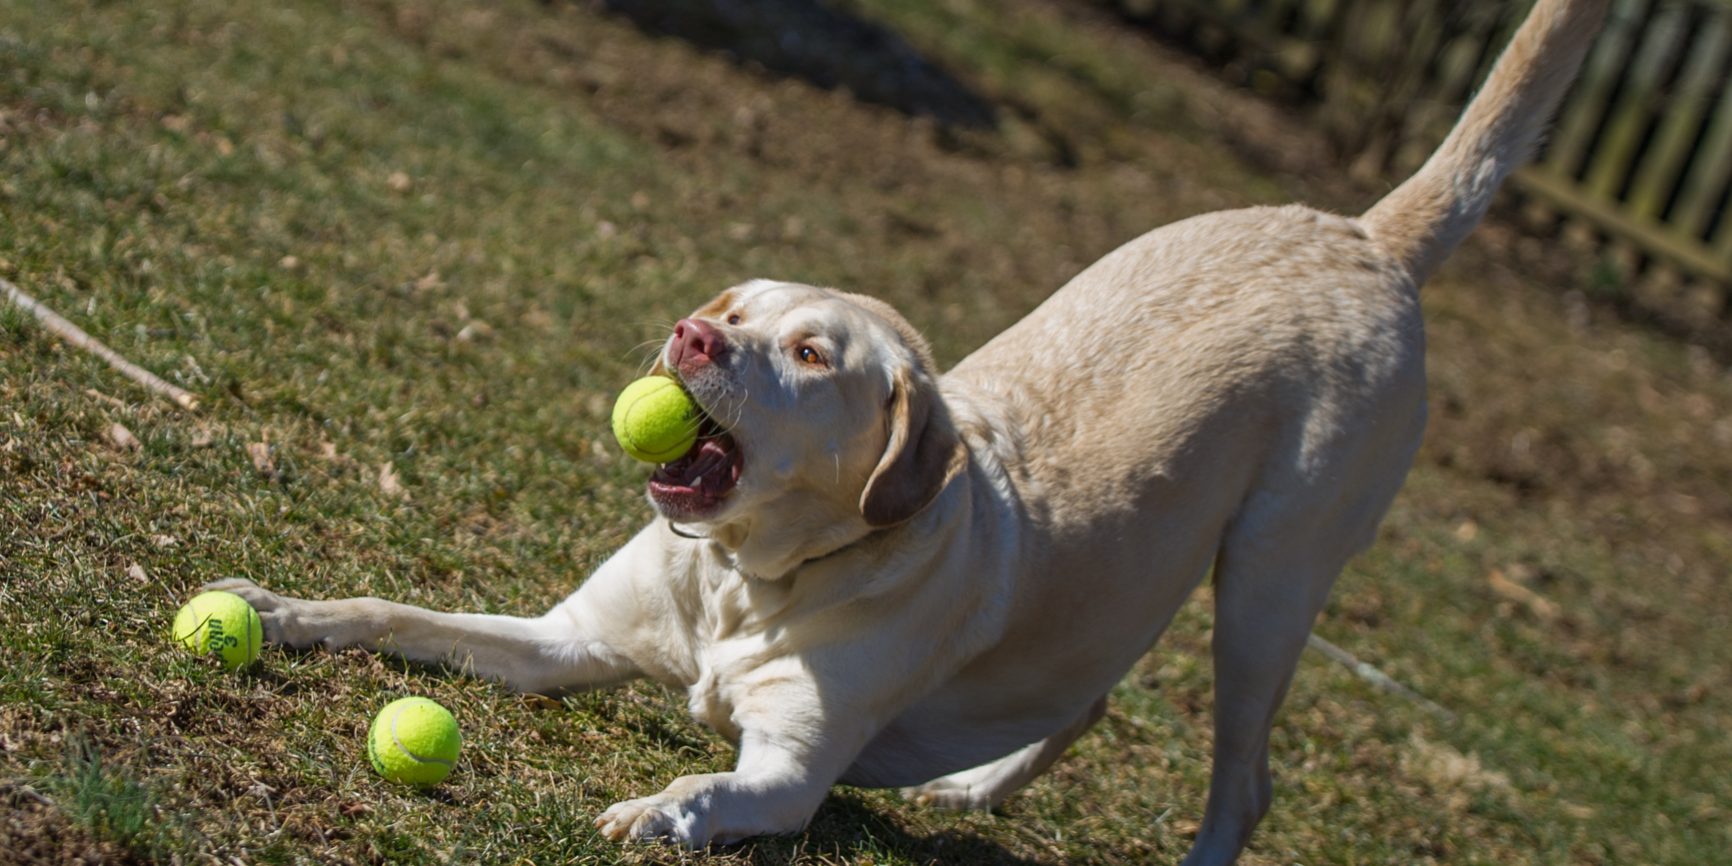 Retriever dog playing fetch in Dog photo session with Kristen Kidd Photography